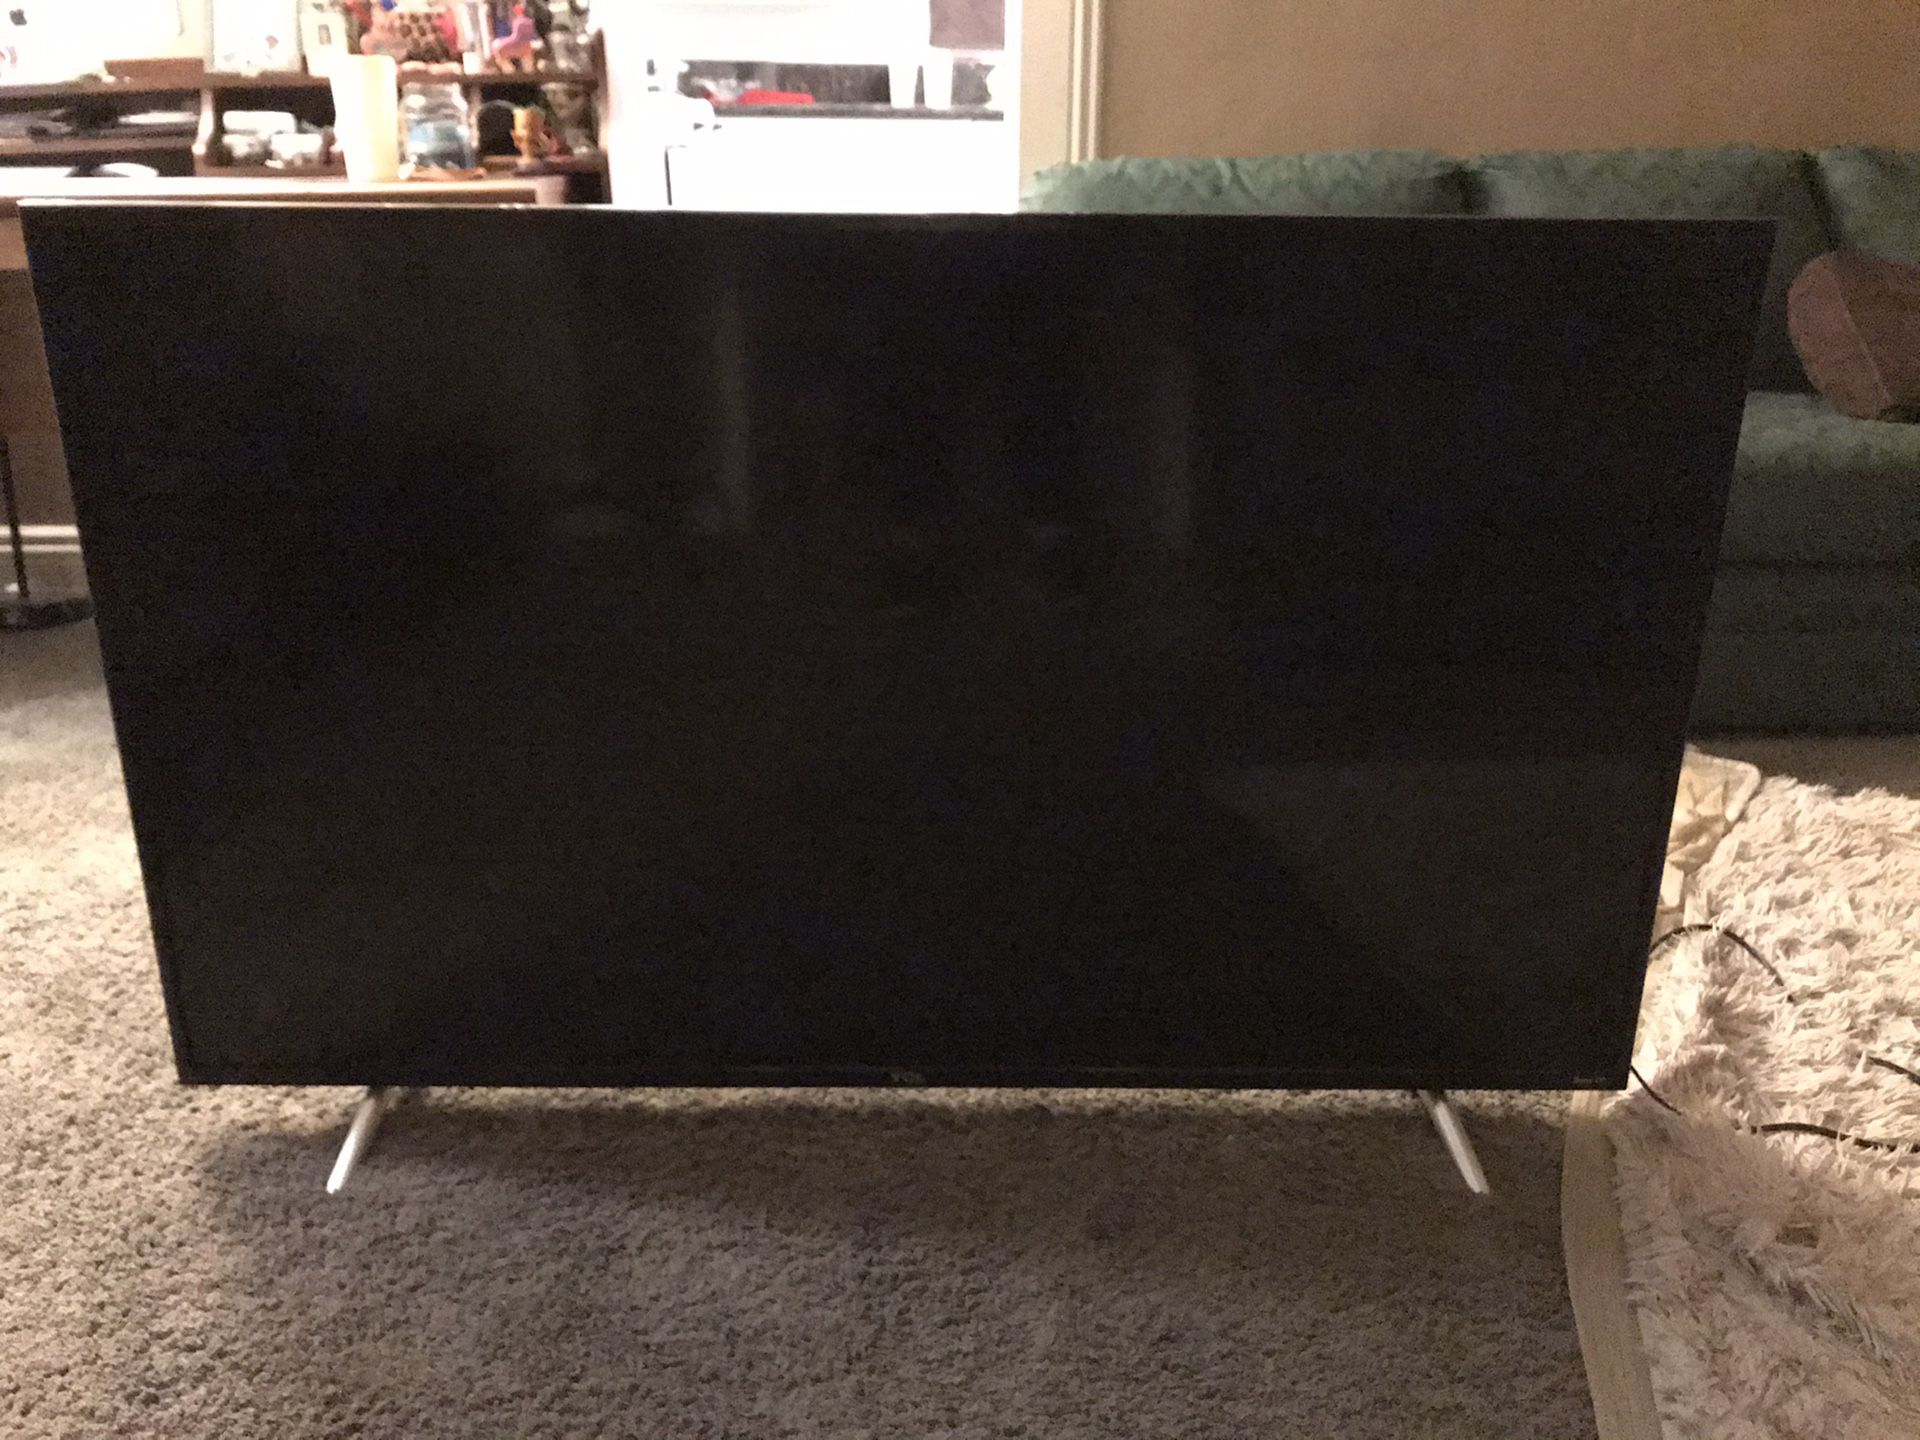 TCL Roku 55” TV Black Screen with Sound Only